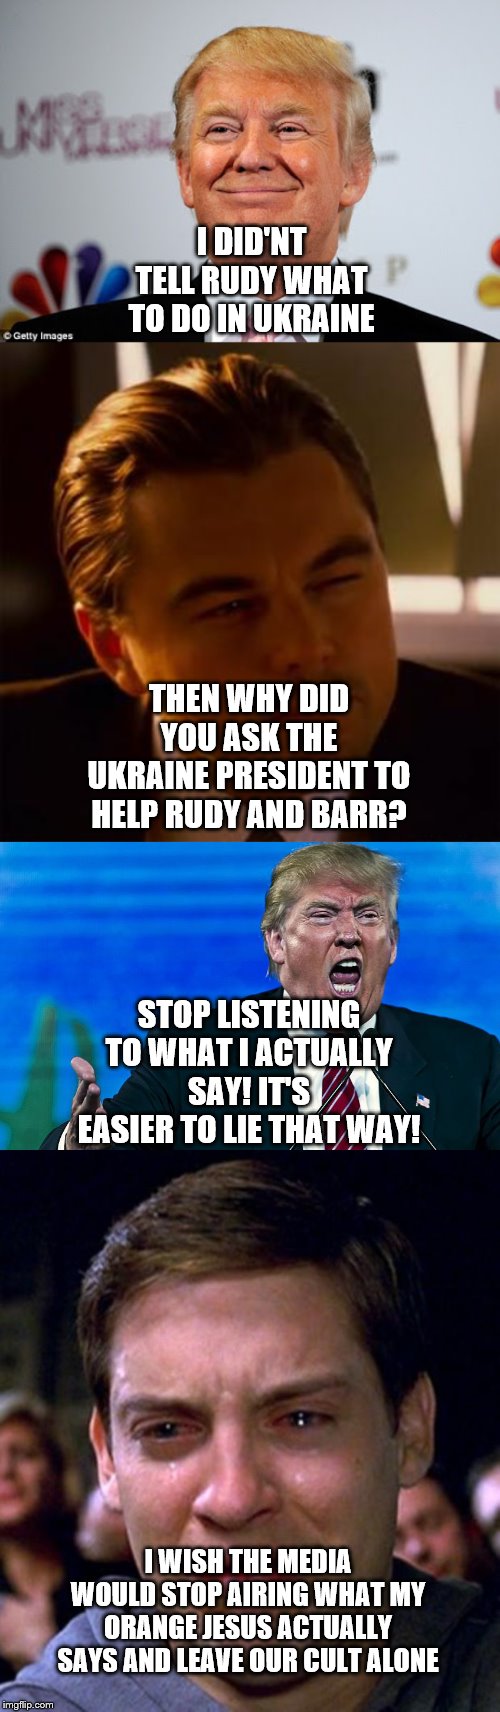 I DID'NT TELL RUDY WHAT TO DO IN UKRAINE; THEN WHY DID YOU ASK THE UKRAINE PRESIDENT TO HELP RUDY AND BARR? STOP LISTENING TO WHAT I ACTUALLY SAY! IT'S EASIER TO LIE THAT WAY! I WISH THE MEDIA WOULD STOP AIRING WHAT MY ORANGE JESUS ACTUALLY SAYS AND LEAVE OUR CULT ALONE | image tagged in crying peter parker,leonardo dicaprio,donald trump approves,angry trump | made w/ Imgflip meme maker